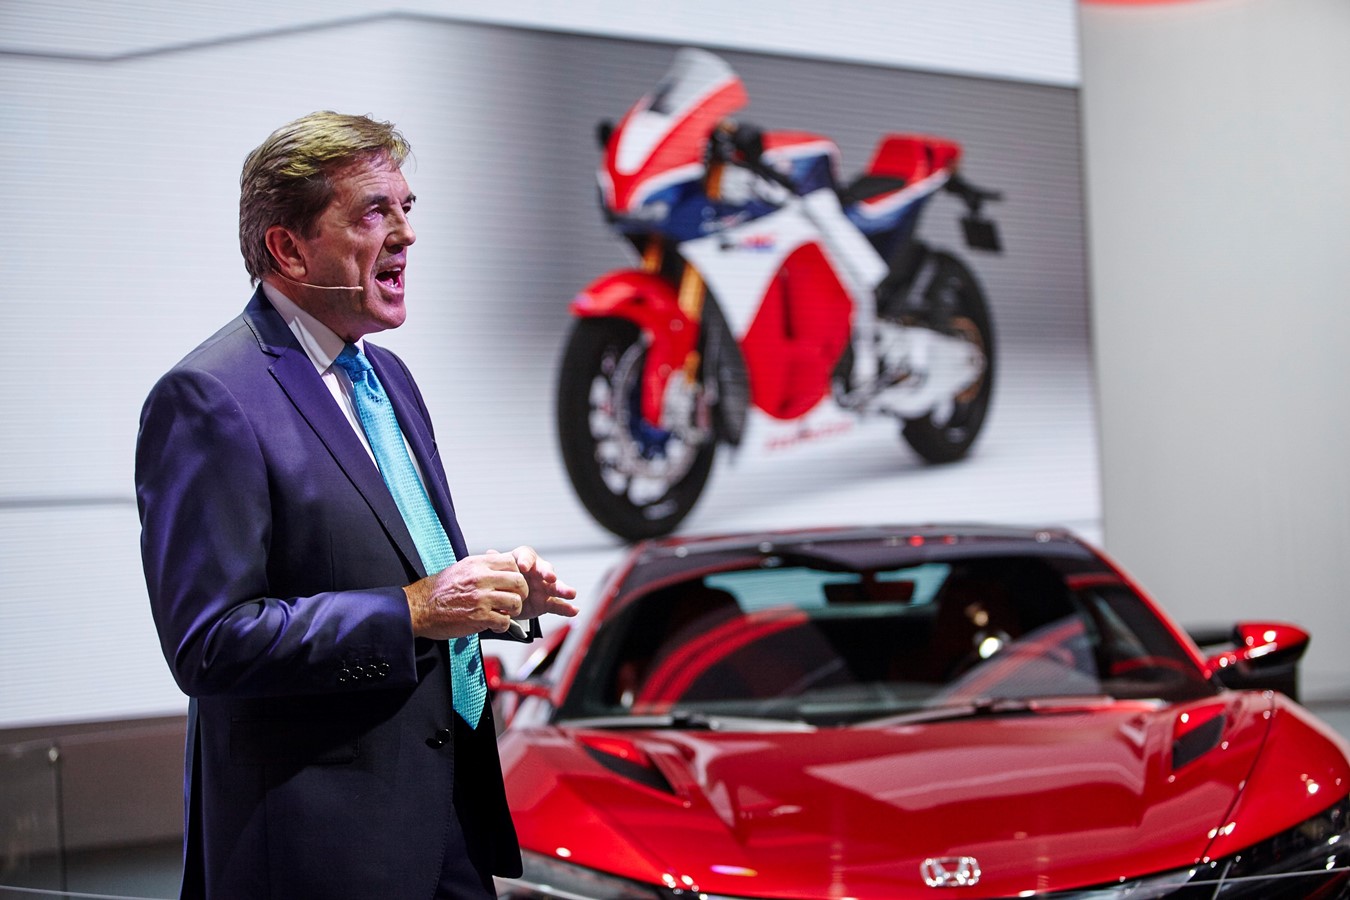 Honda’s renewed line up is the first step towards growth in Europe